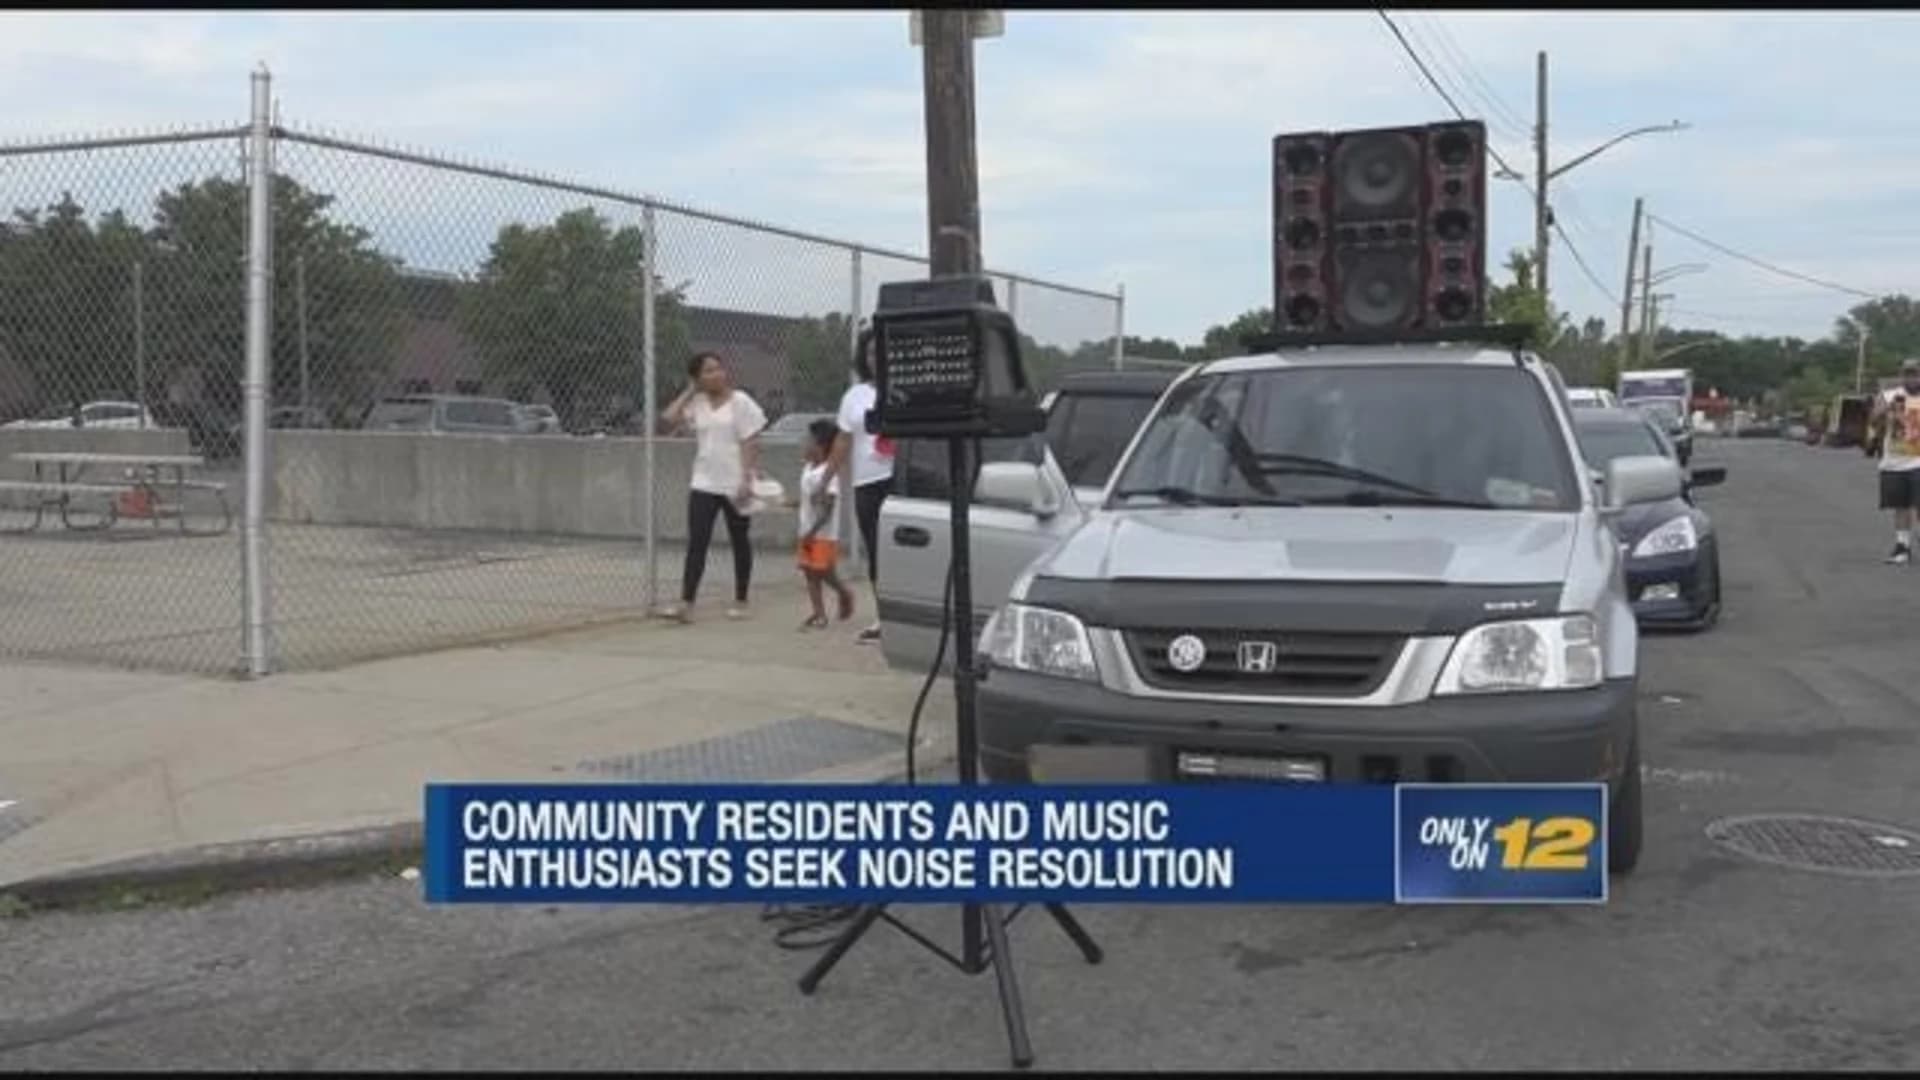 Residents say loud music on Waterbury Avenue kept them up at night